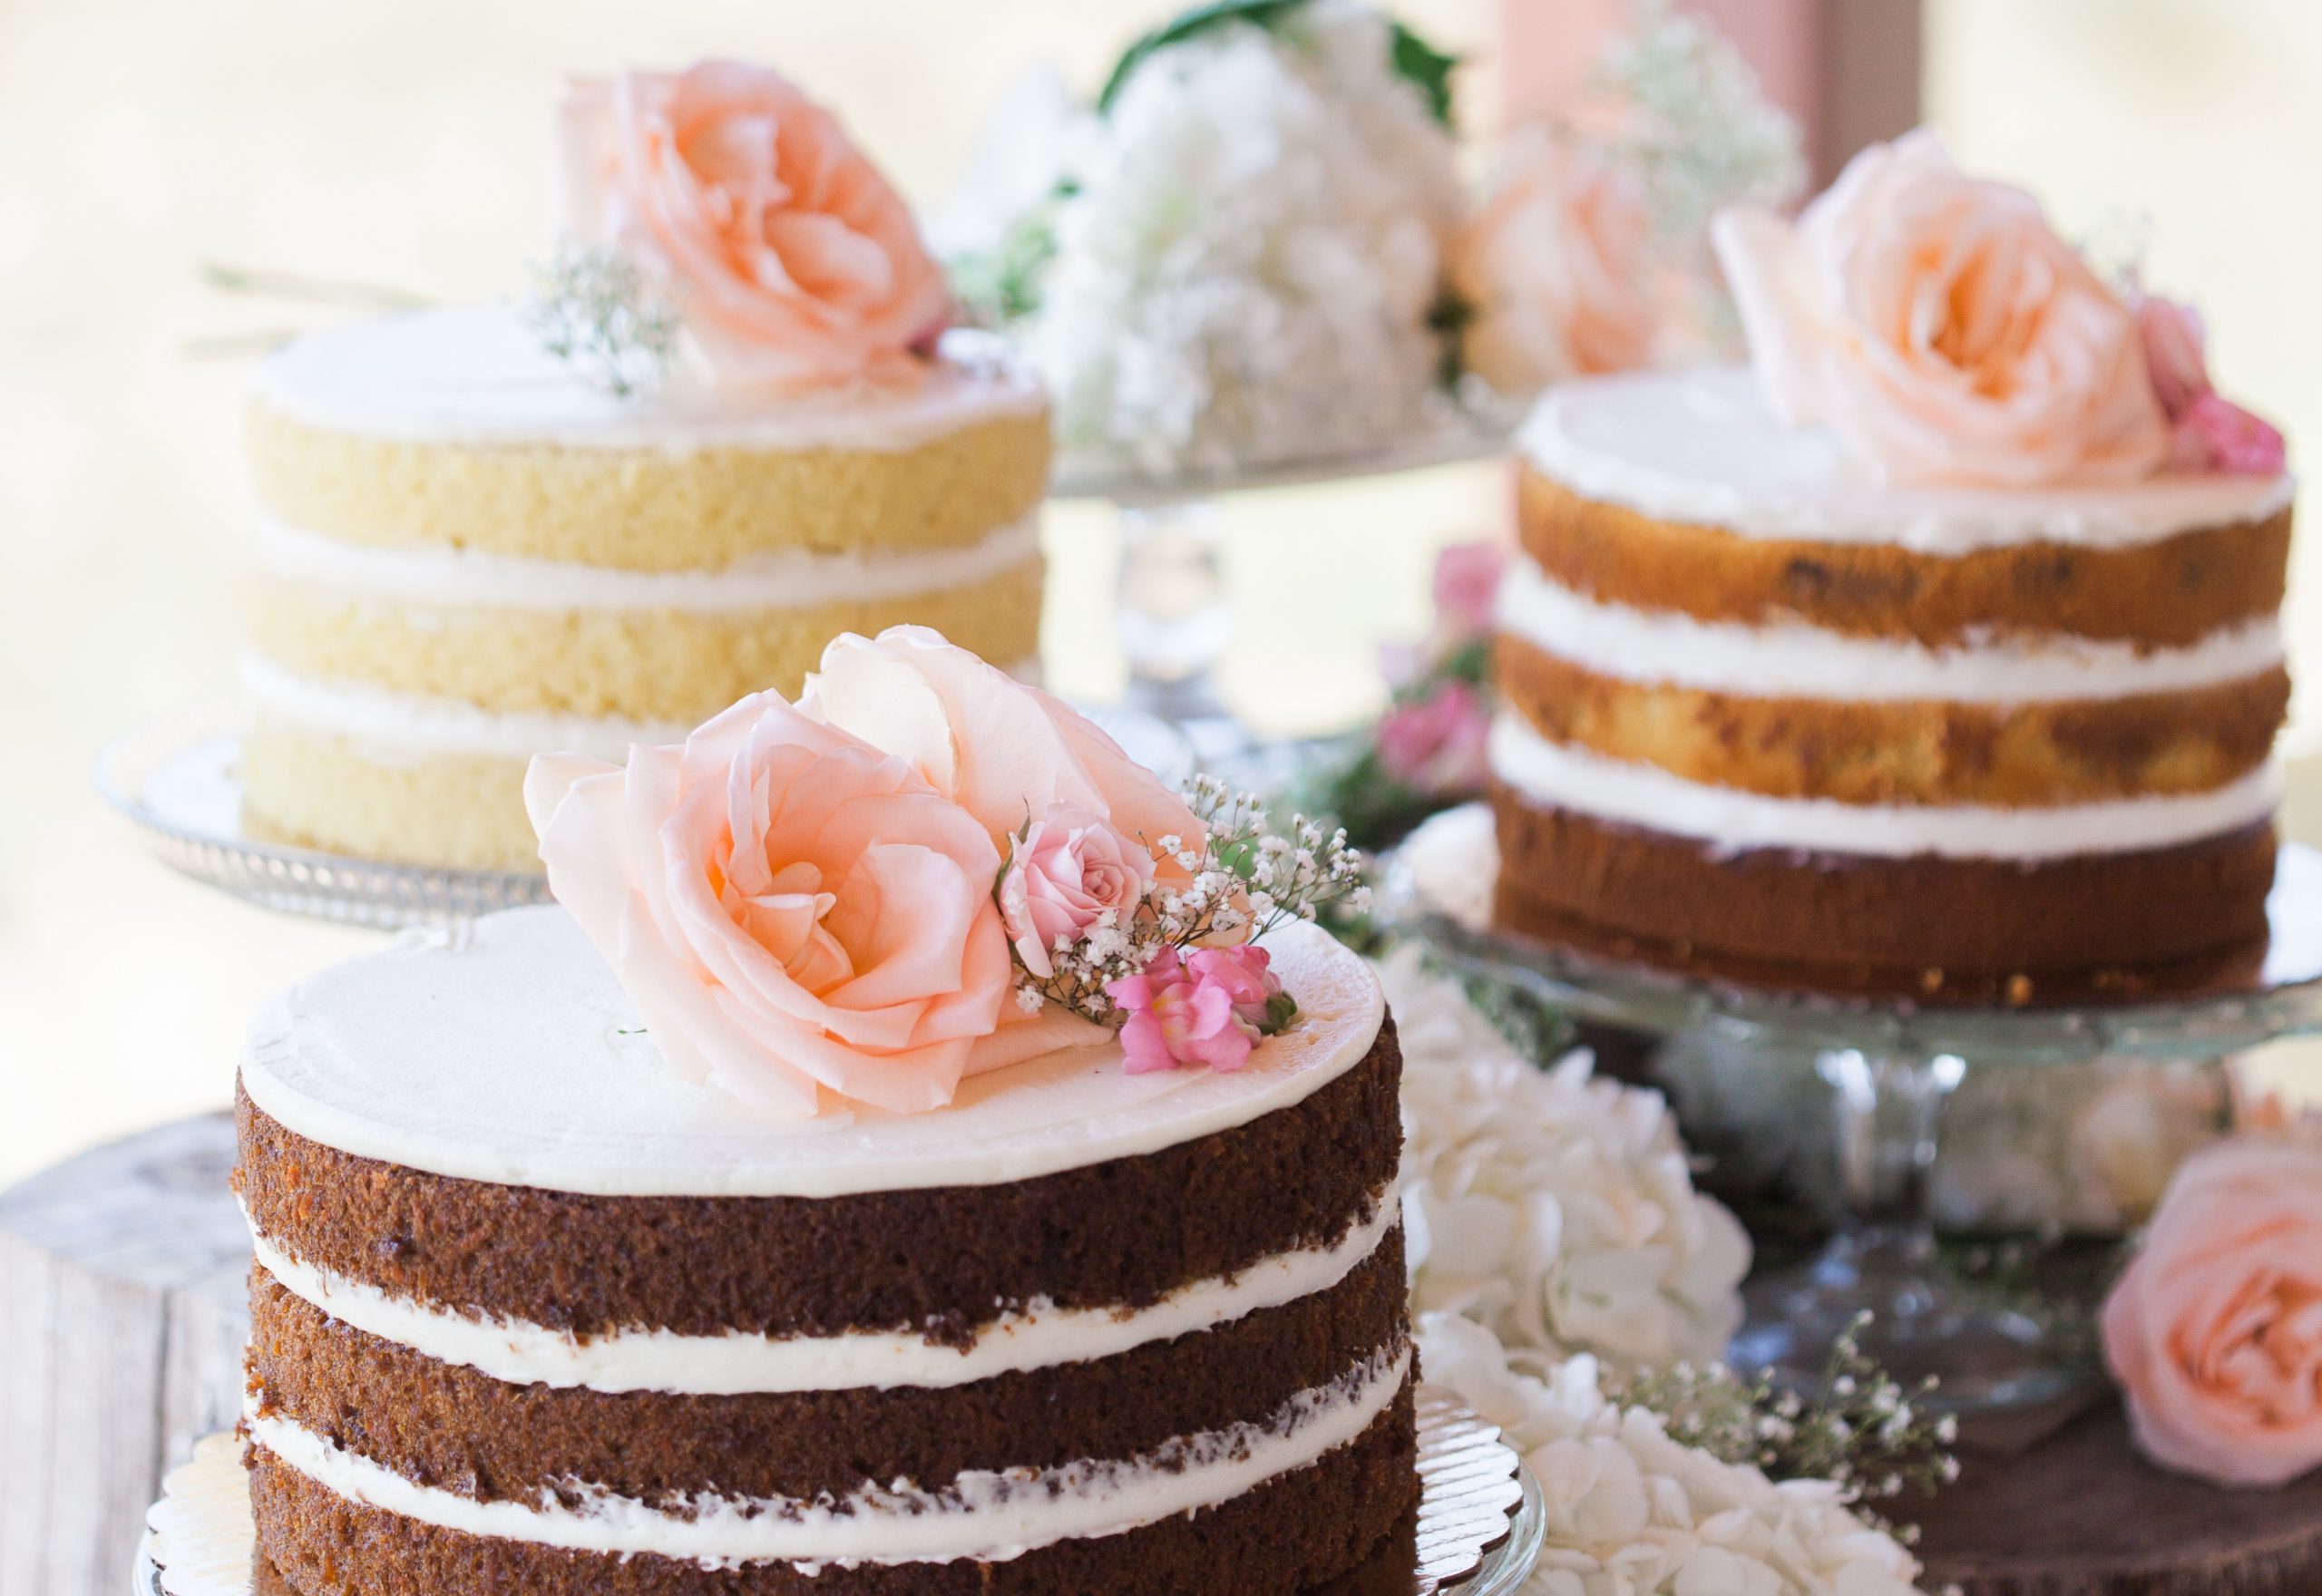 Five Items to Bring with You to Your Cake Tasting